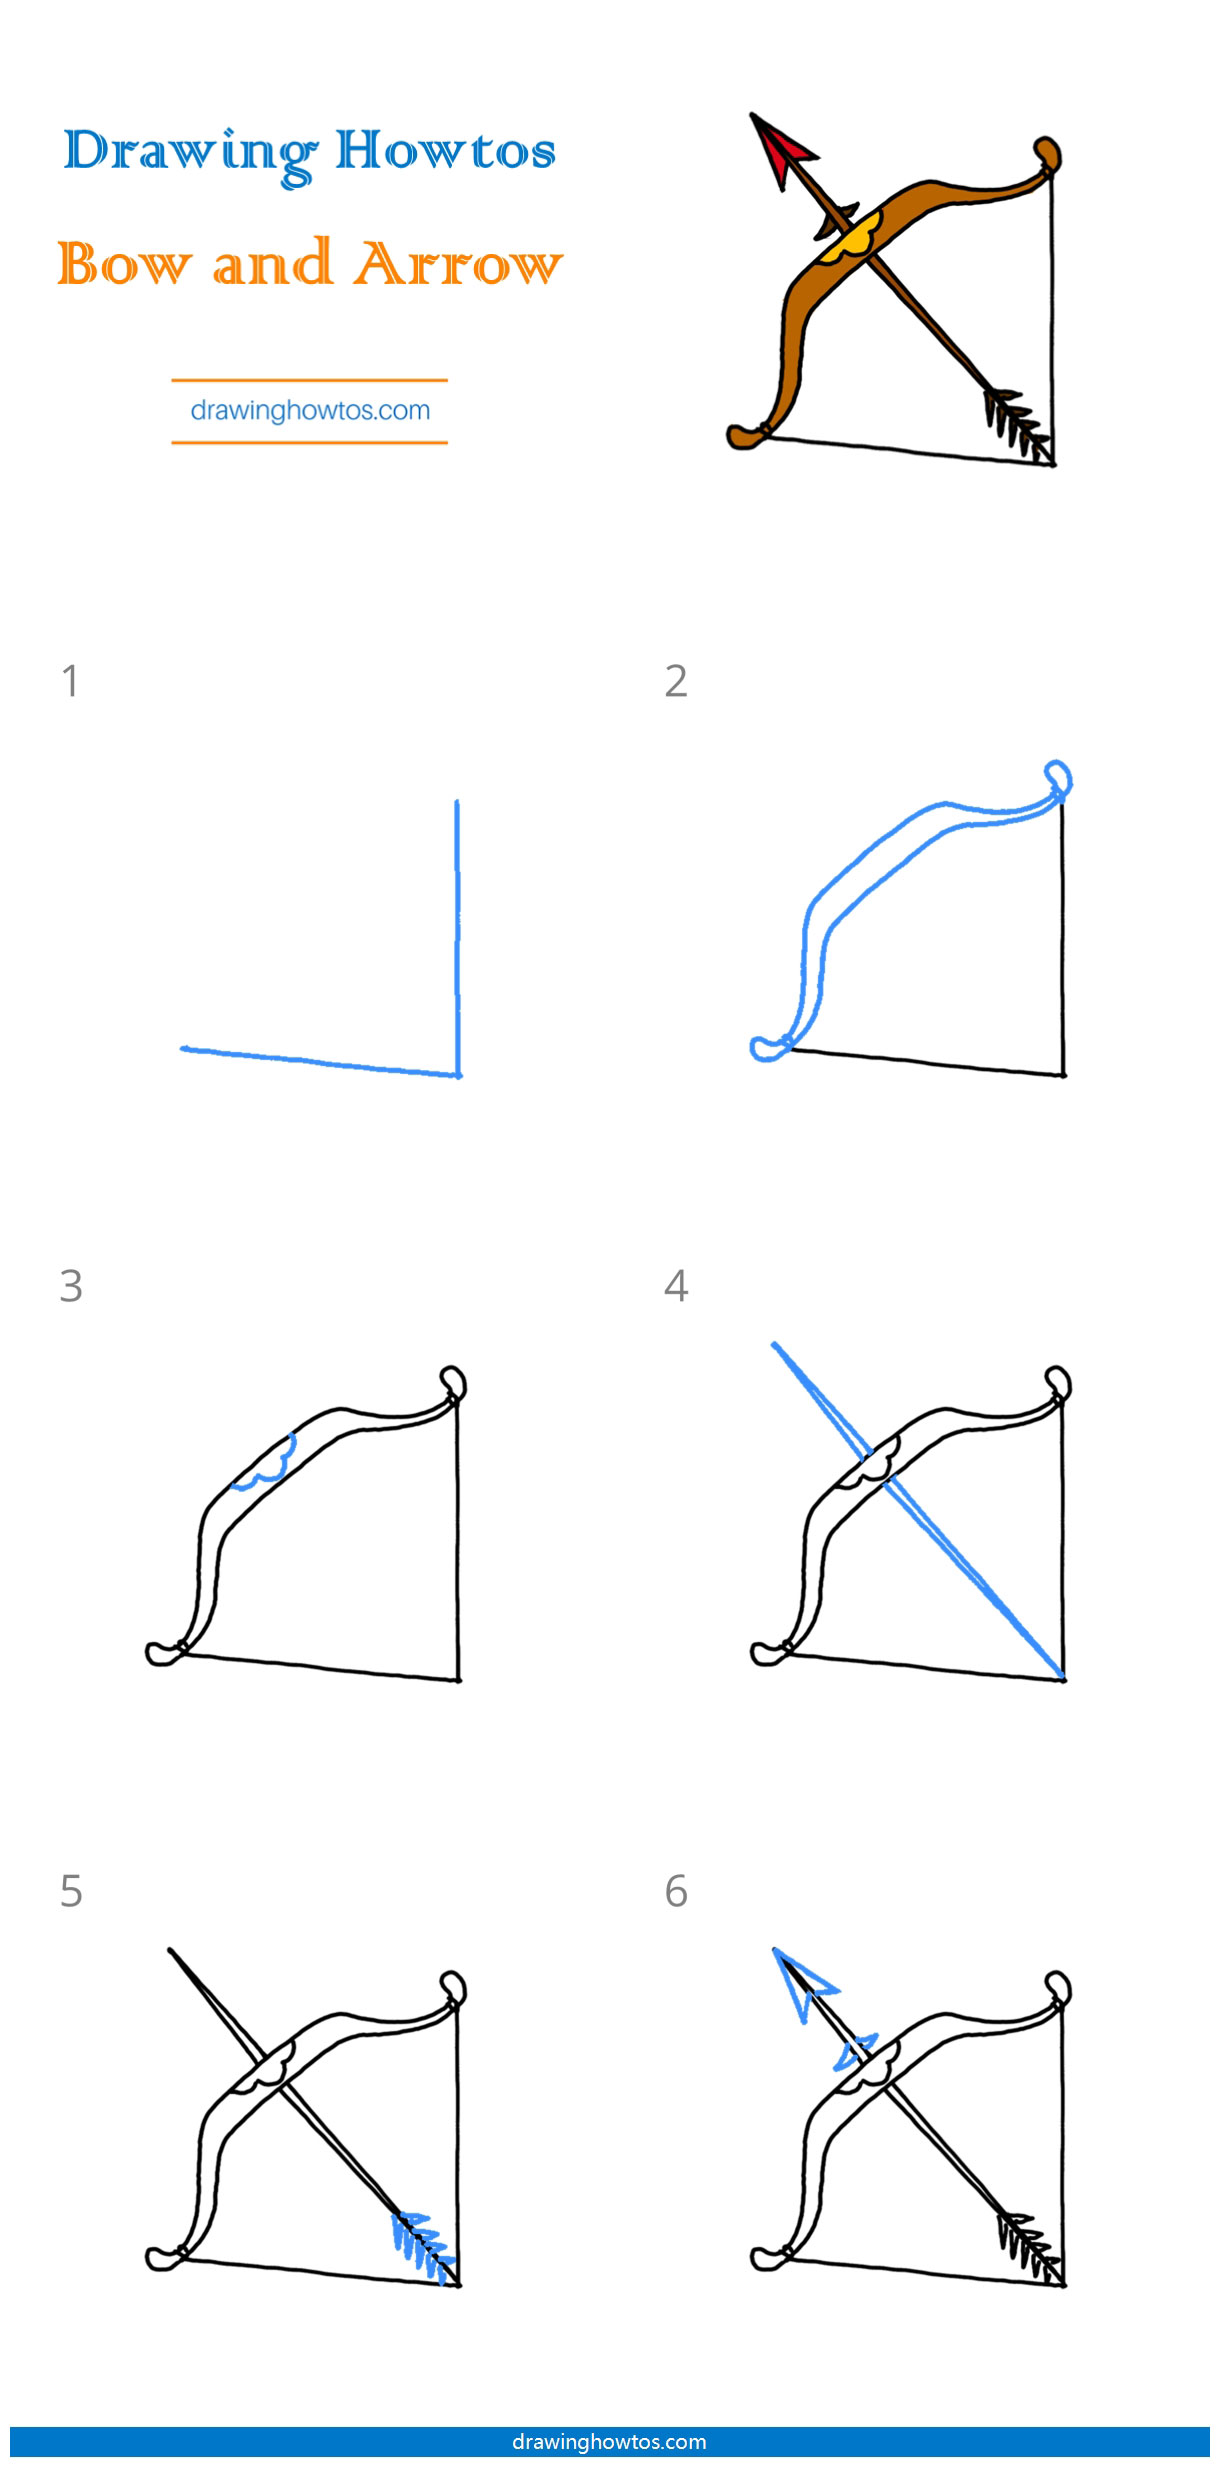 How to Draw a Bow and Arrow Step by Step